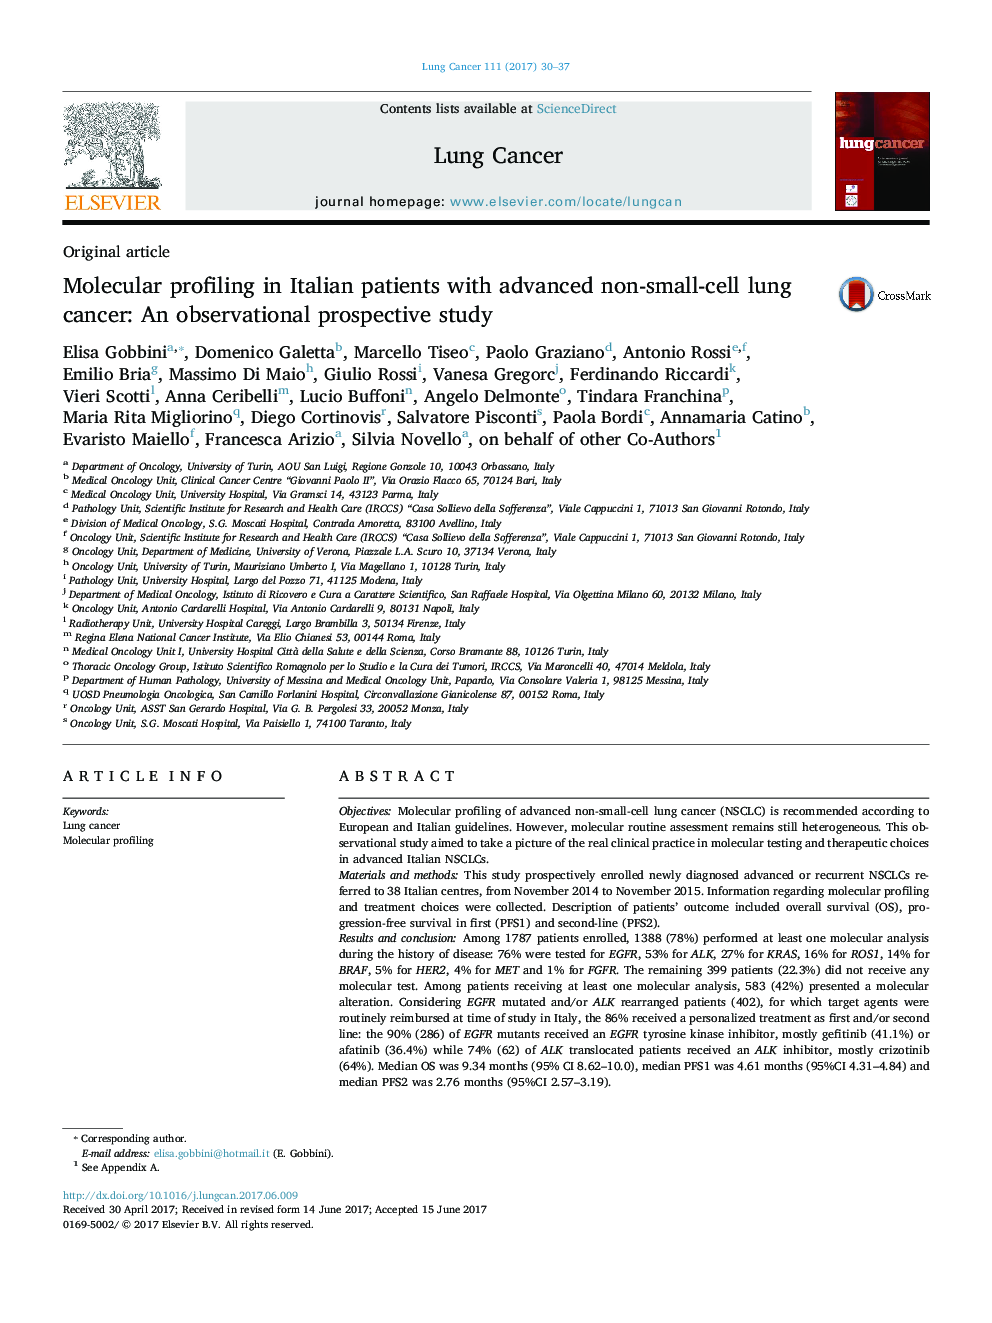 Original articleMolecular profiling in Italian patients with advanced non-small-cell lung cancer: An observational prospective study